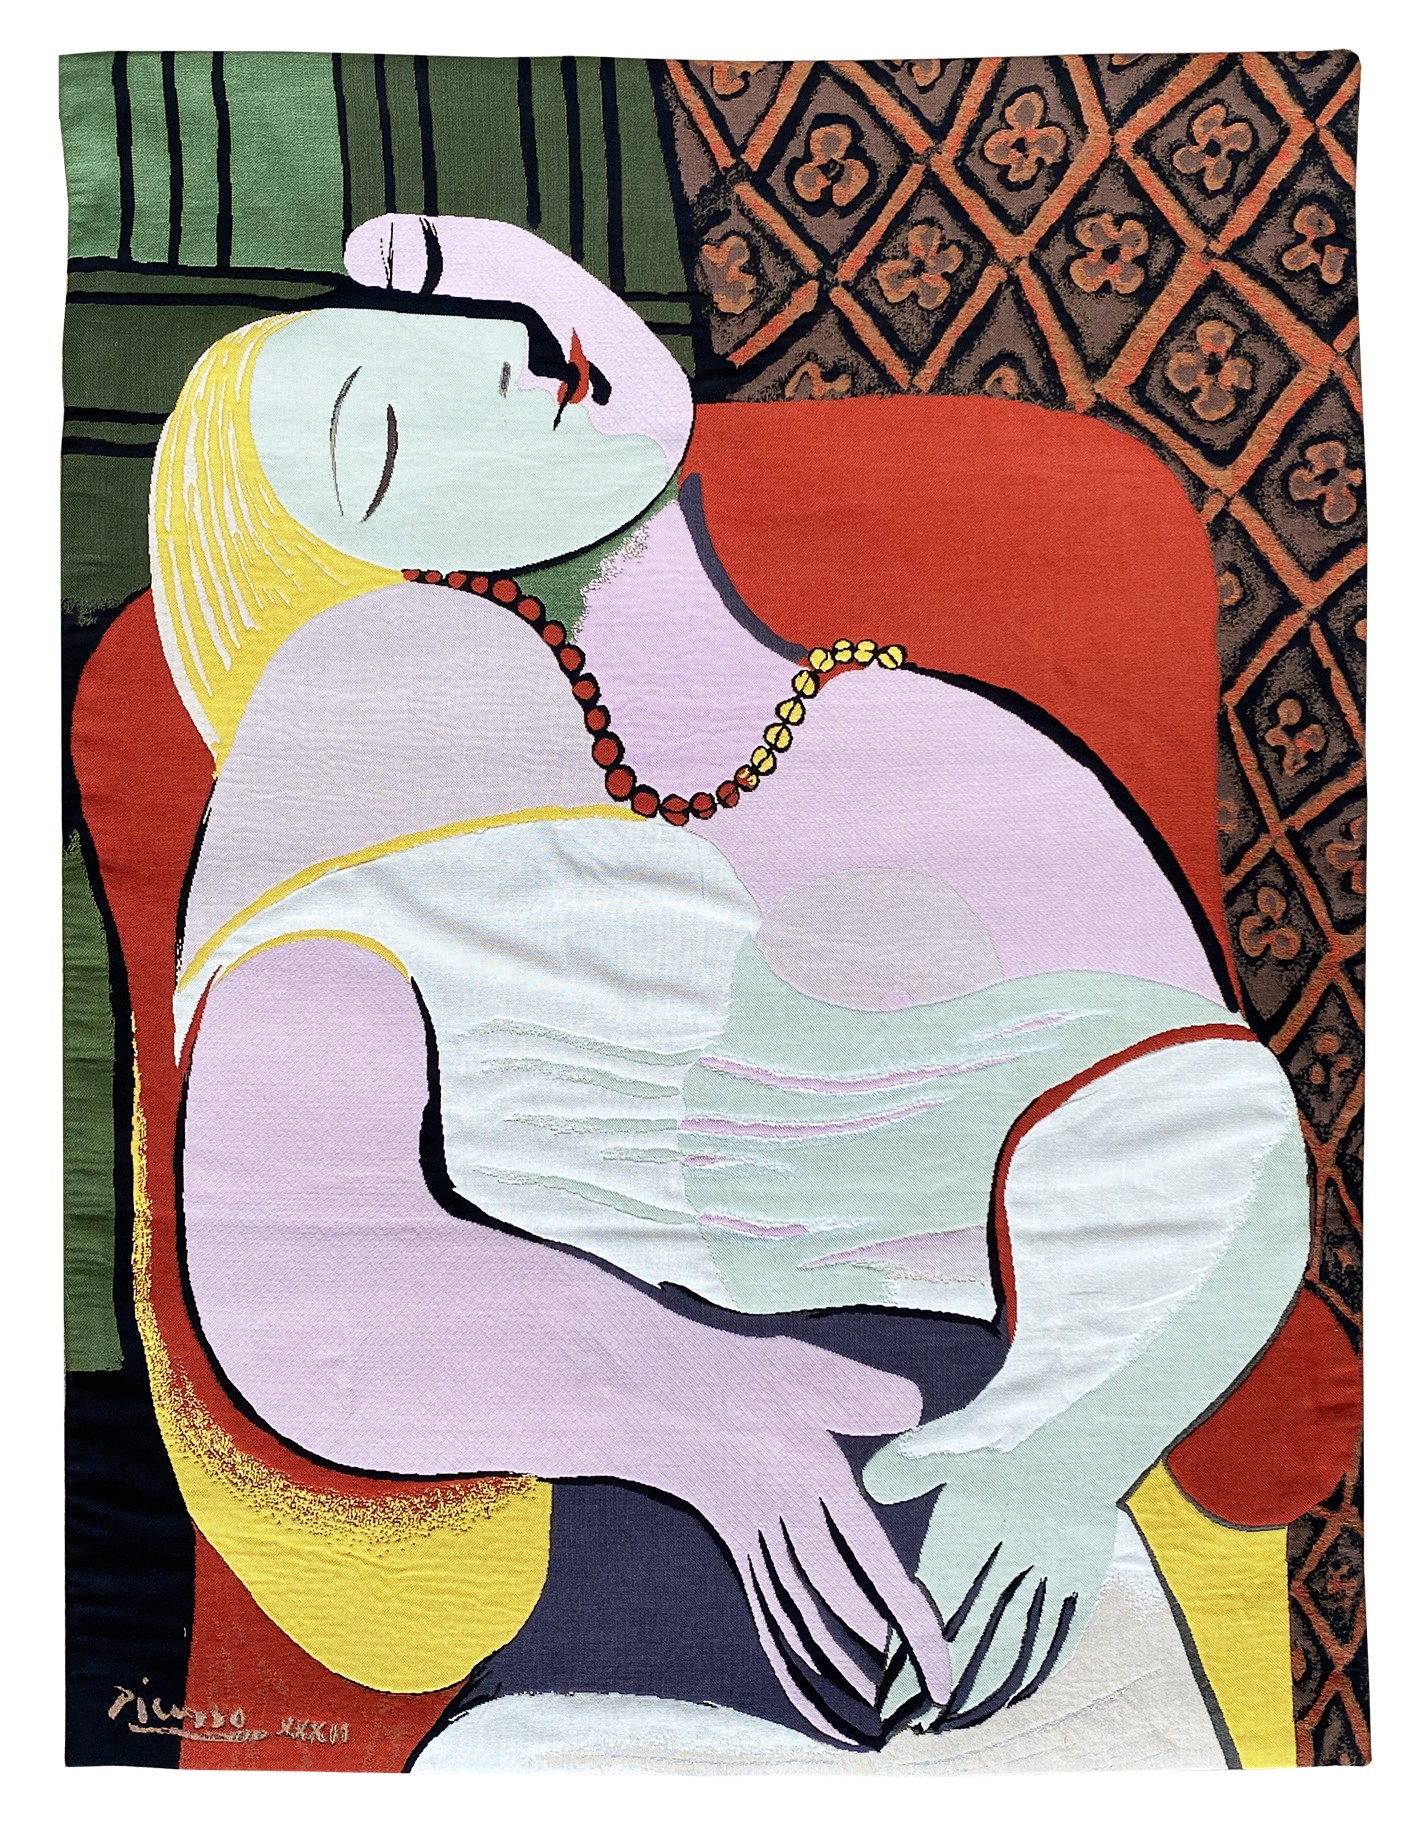 The dream, Picasso's tapestry